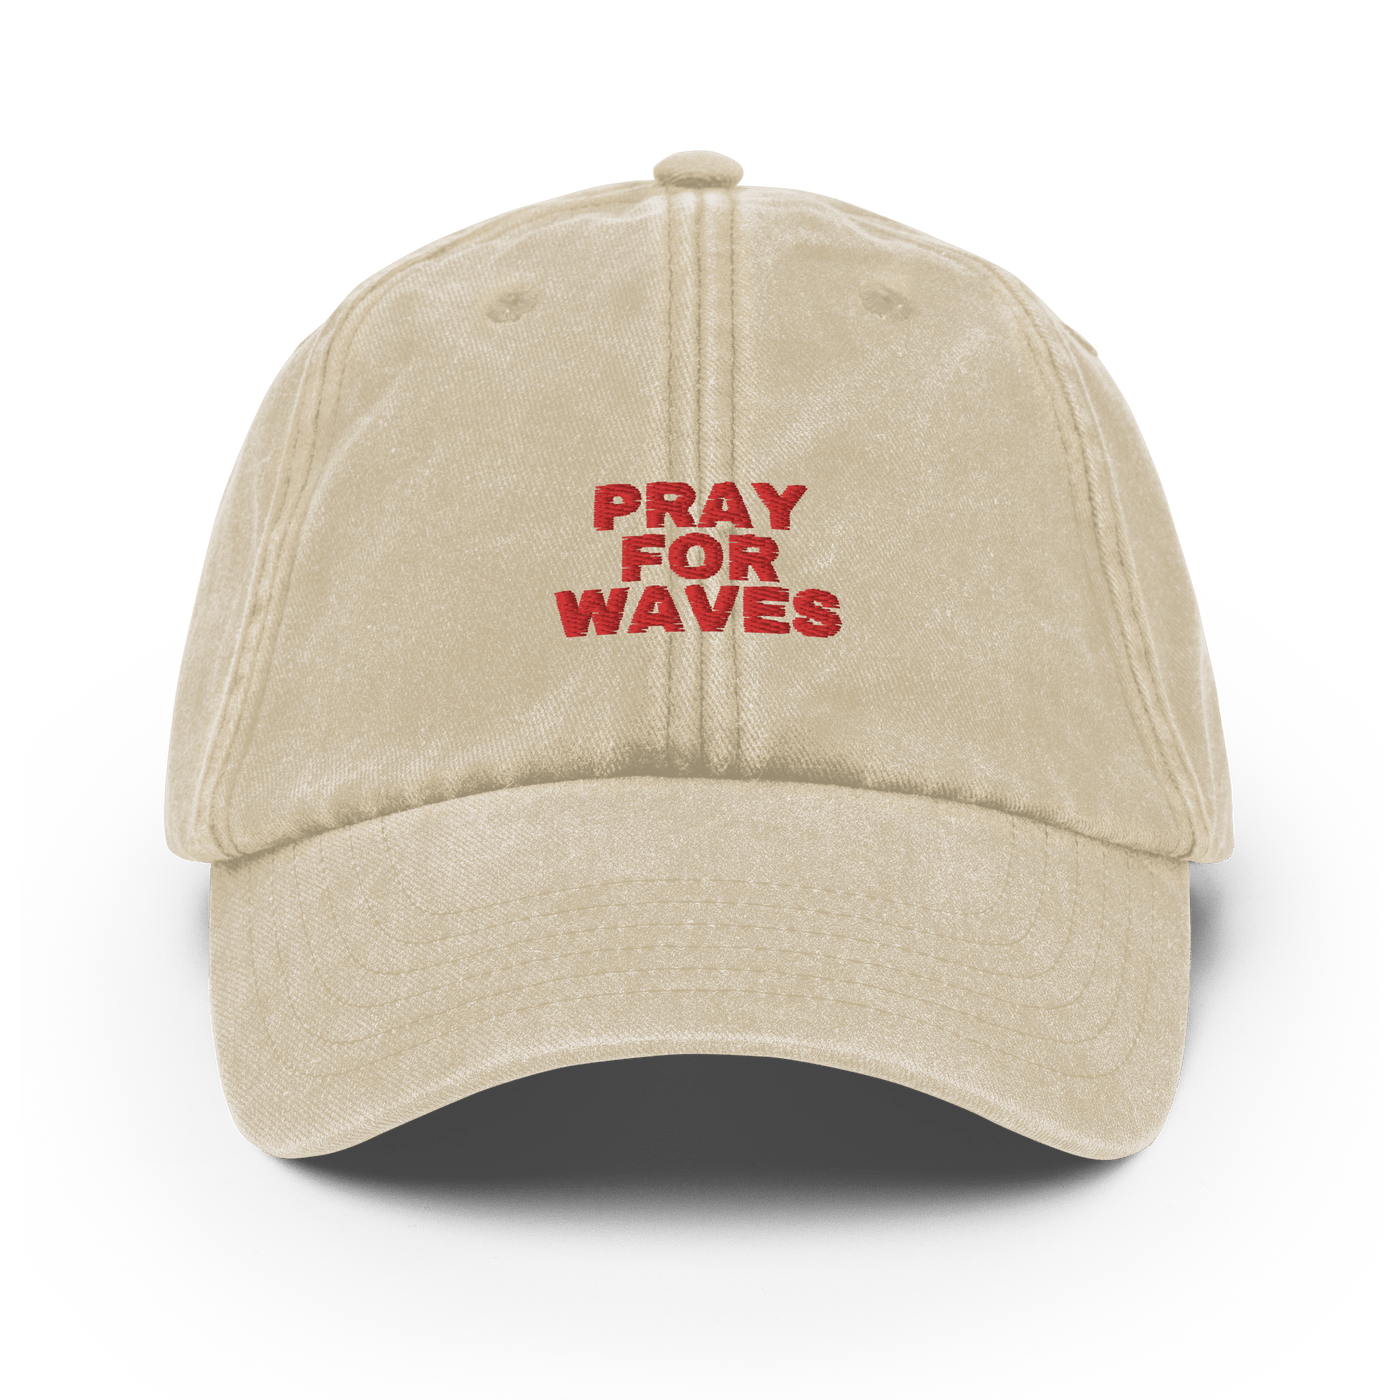 Pray For Waves Vintage Hat - Vintage Stone - Just Another Cap Store